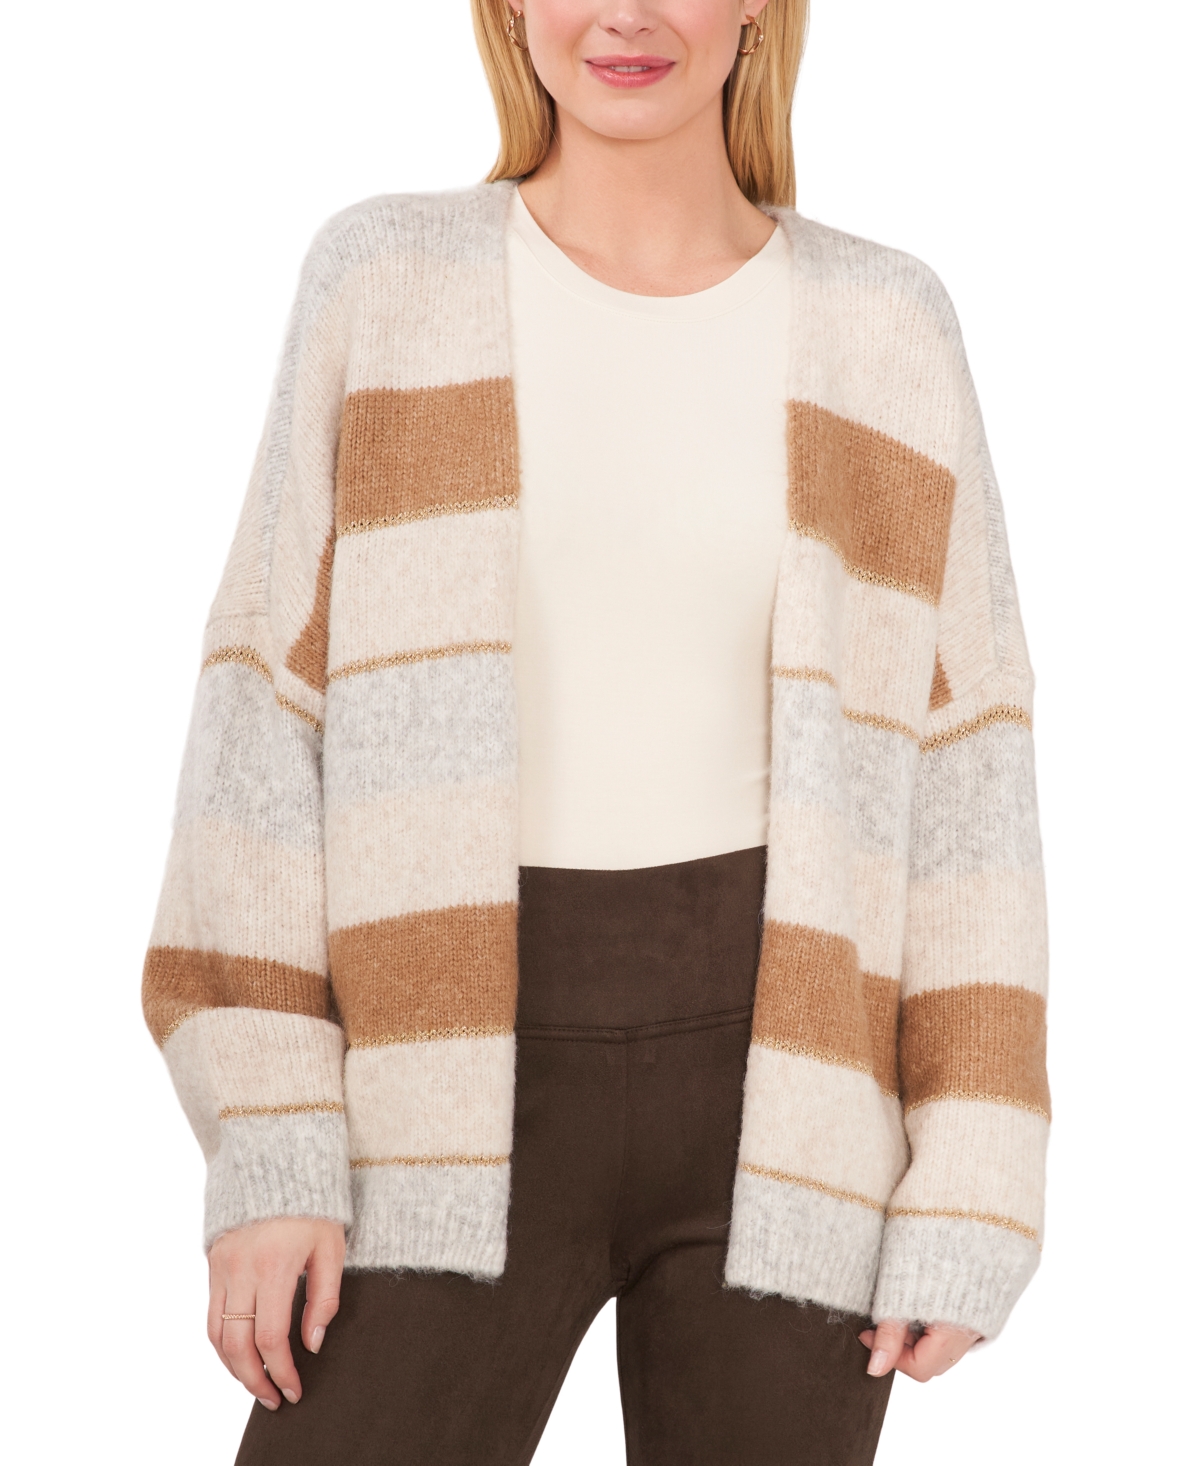 Vince Camuto Women's Mixed-Stripe Open-Front Cardigan